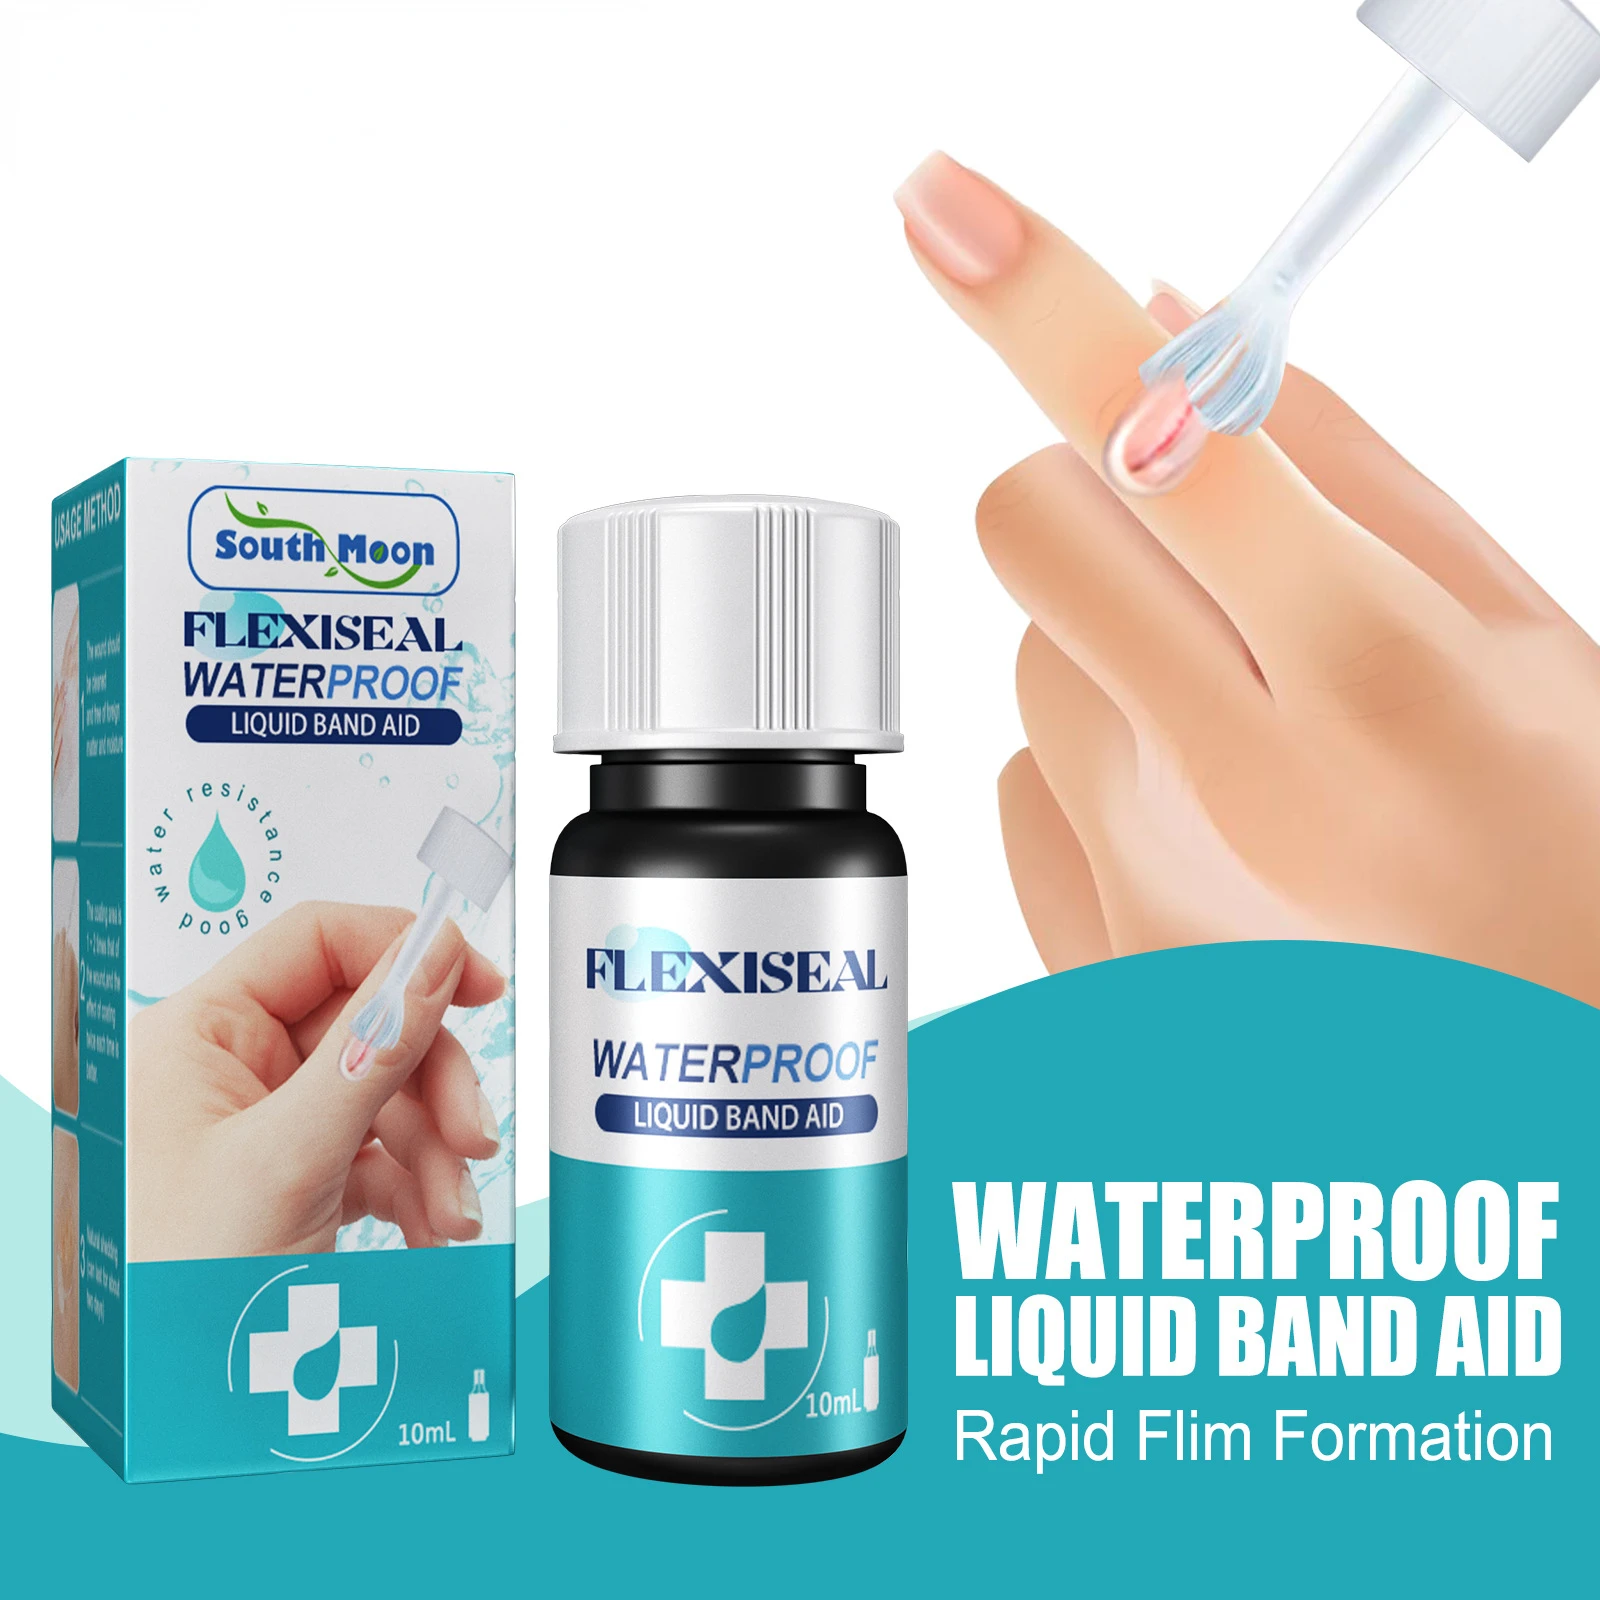 

Waterproof liquid band-aid wound surface protection fast film-forming transparent liquid band-aid